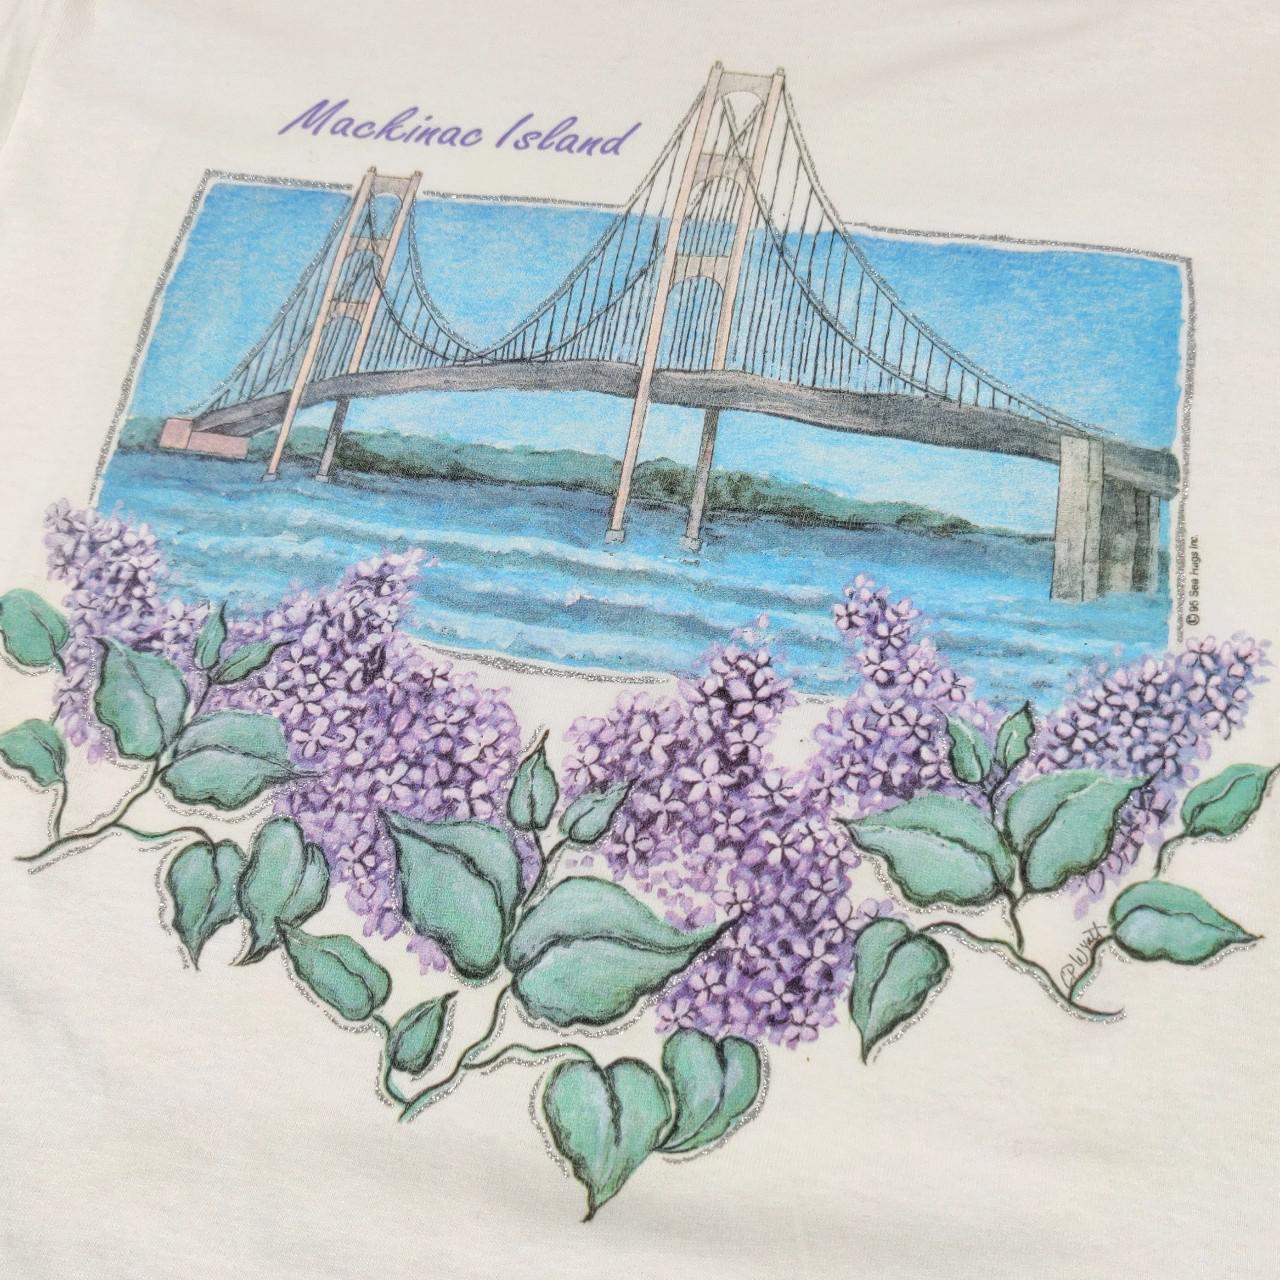 American Vintage Women's White and Purple T-shirt (2)